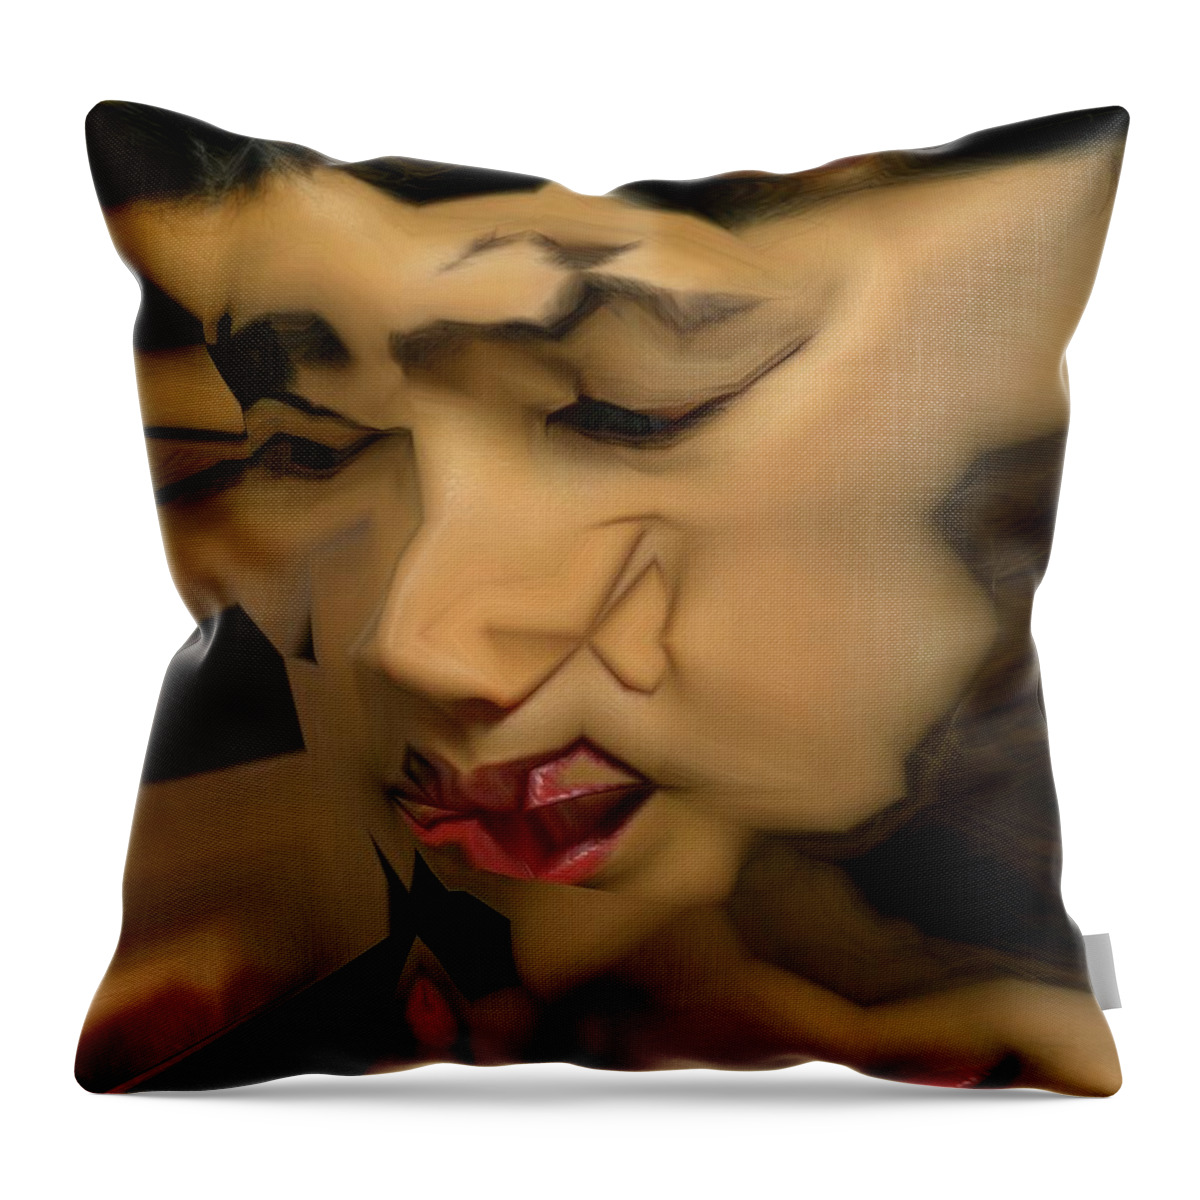 Digital Throw Pillow featuring the photograph The Mask by Jonas Luis